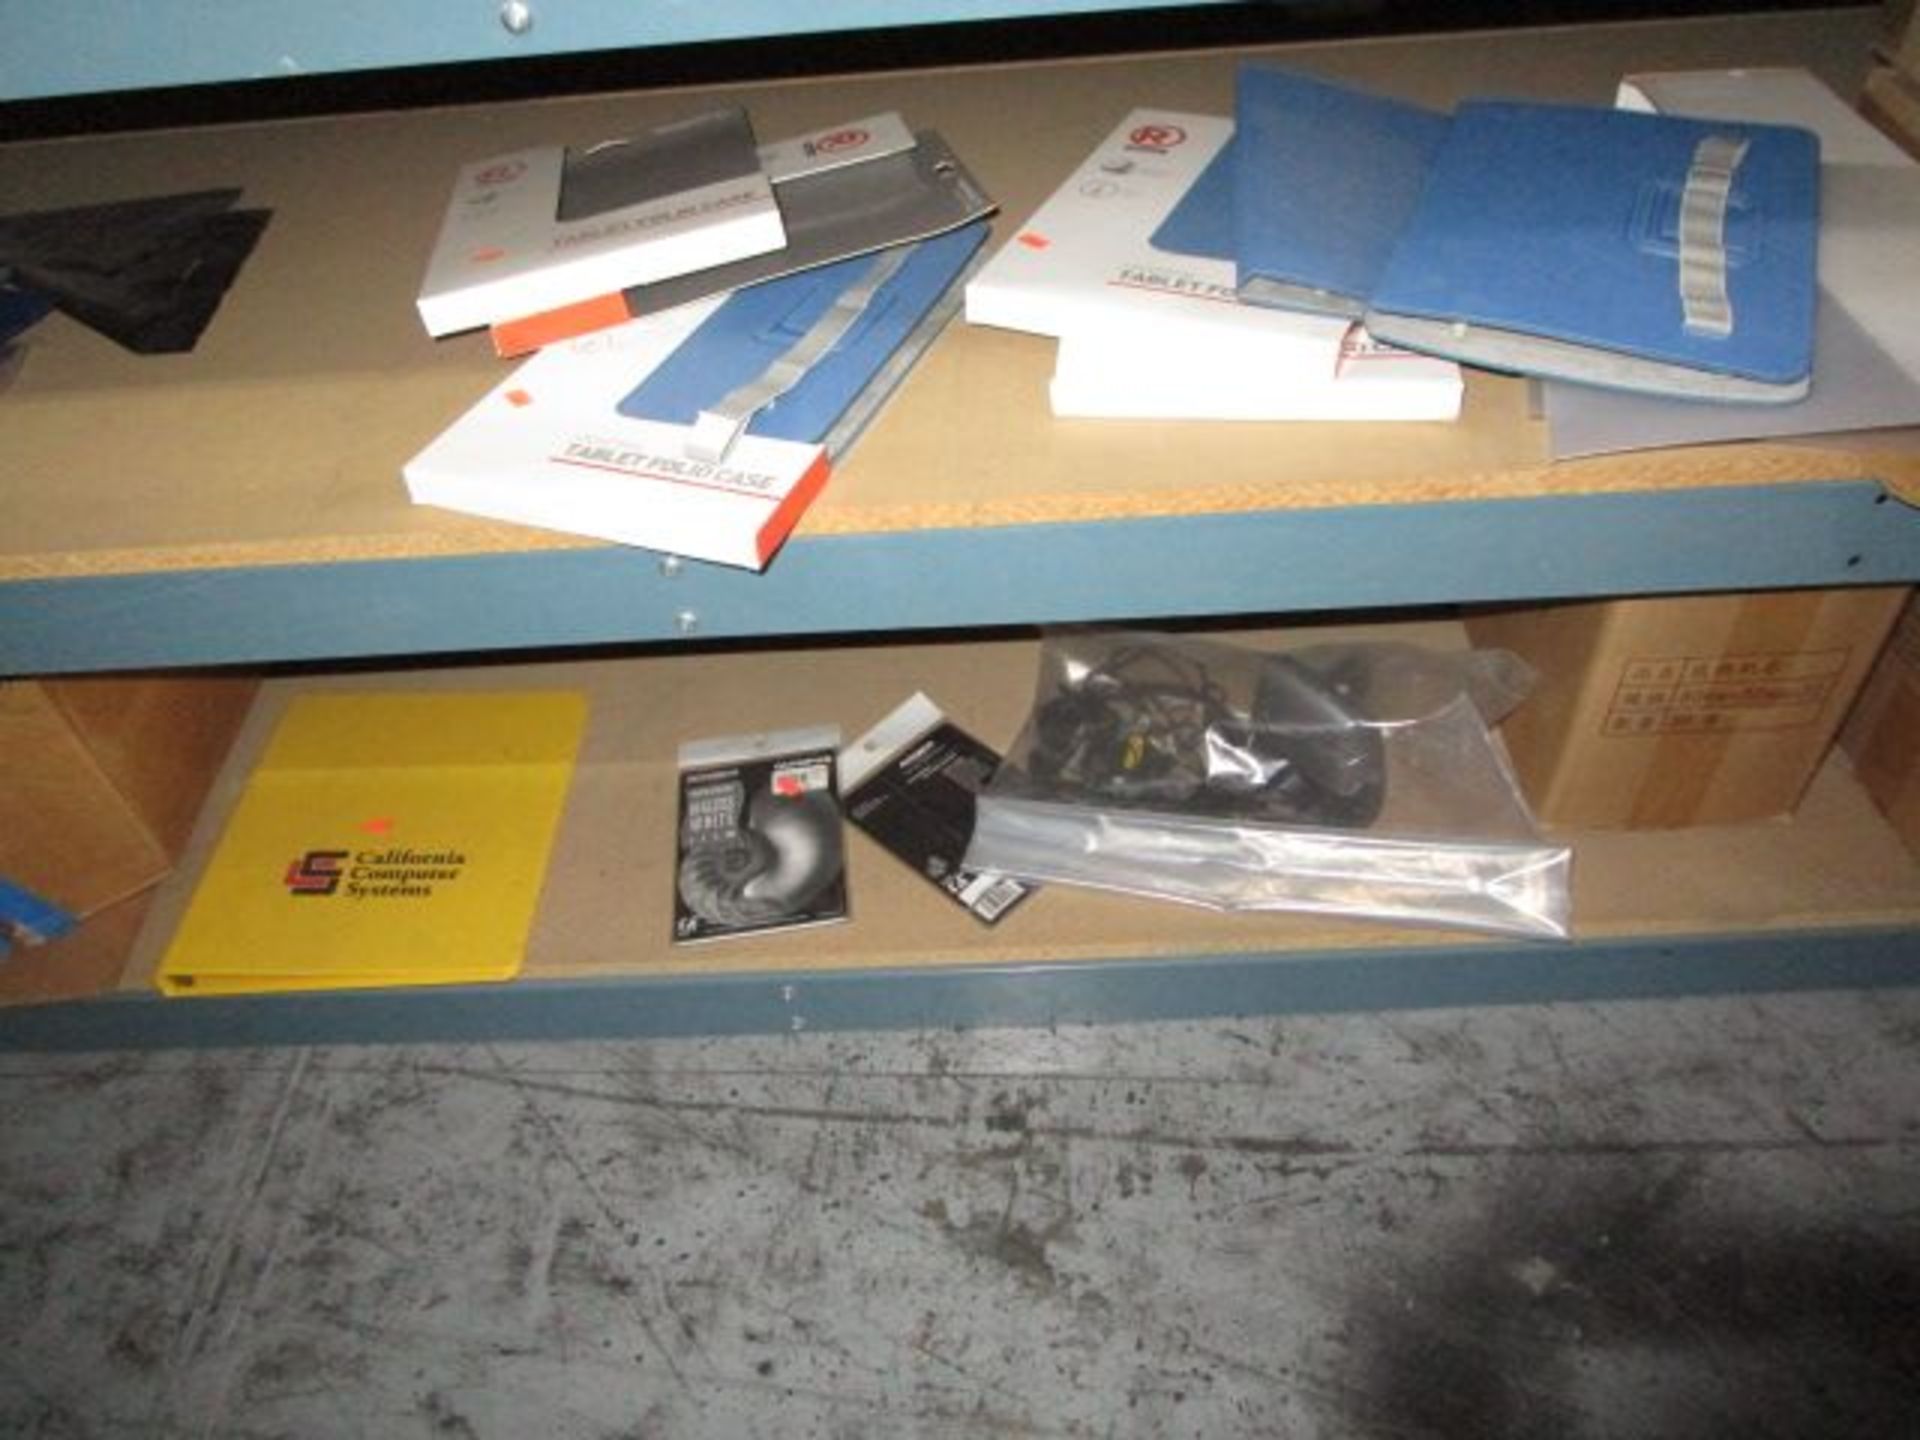 SHELVING UNIT OF ASSORTMENT OF ATTENTION CONES, MARKERS, BINDERS - Image 12 of 14